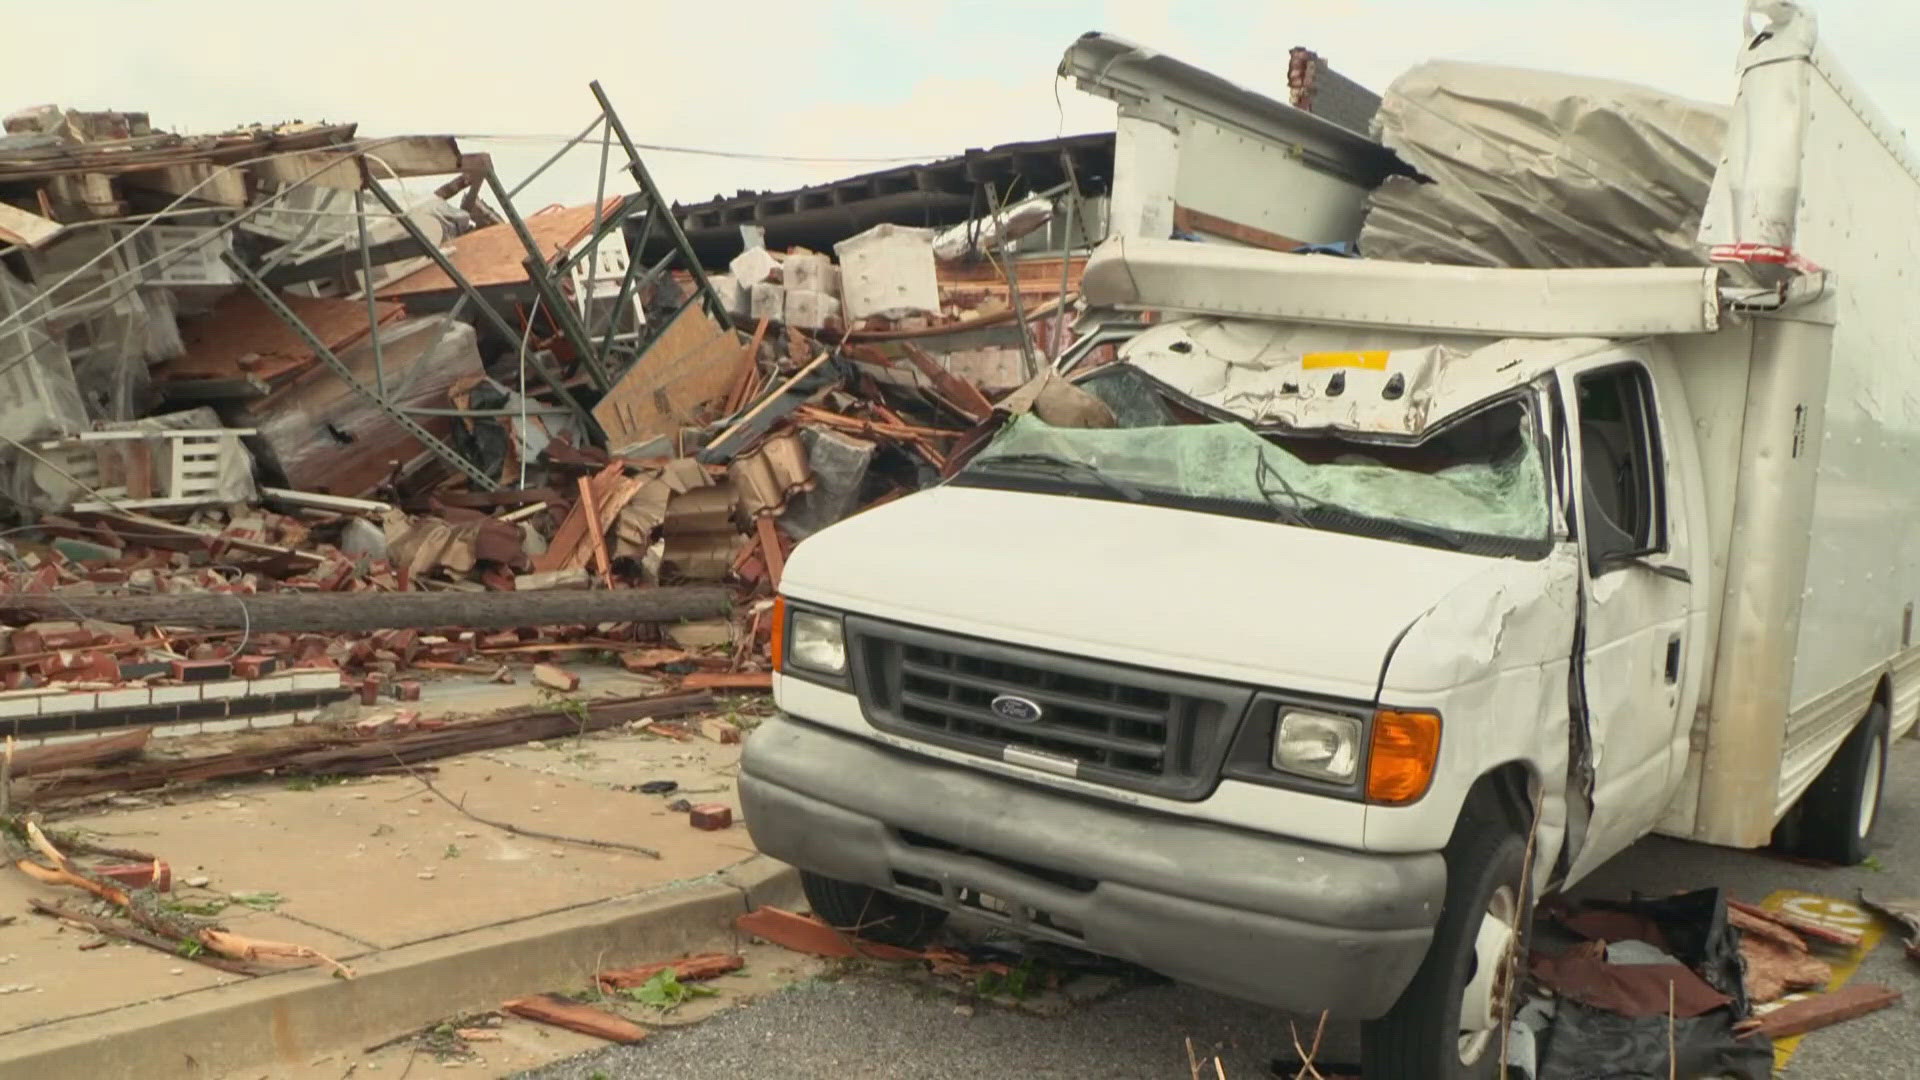 Sunday officials announced at least four people died from the outbreak of tornadoes that hit Oklahoma late Saturday, including a four-month-old baby.